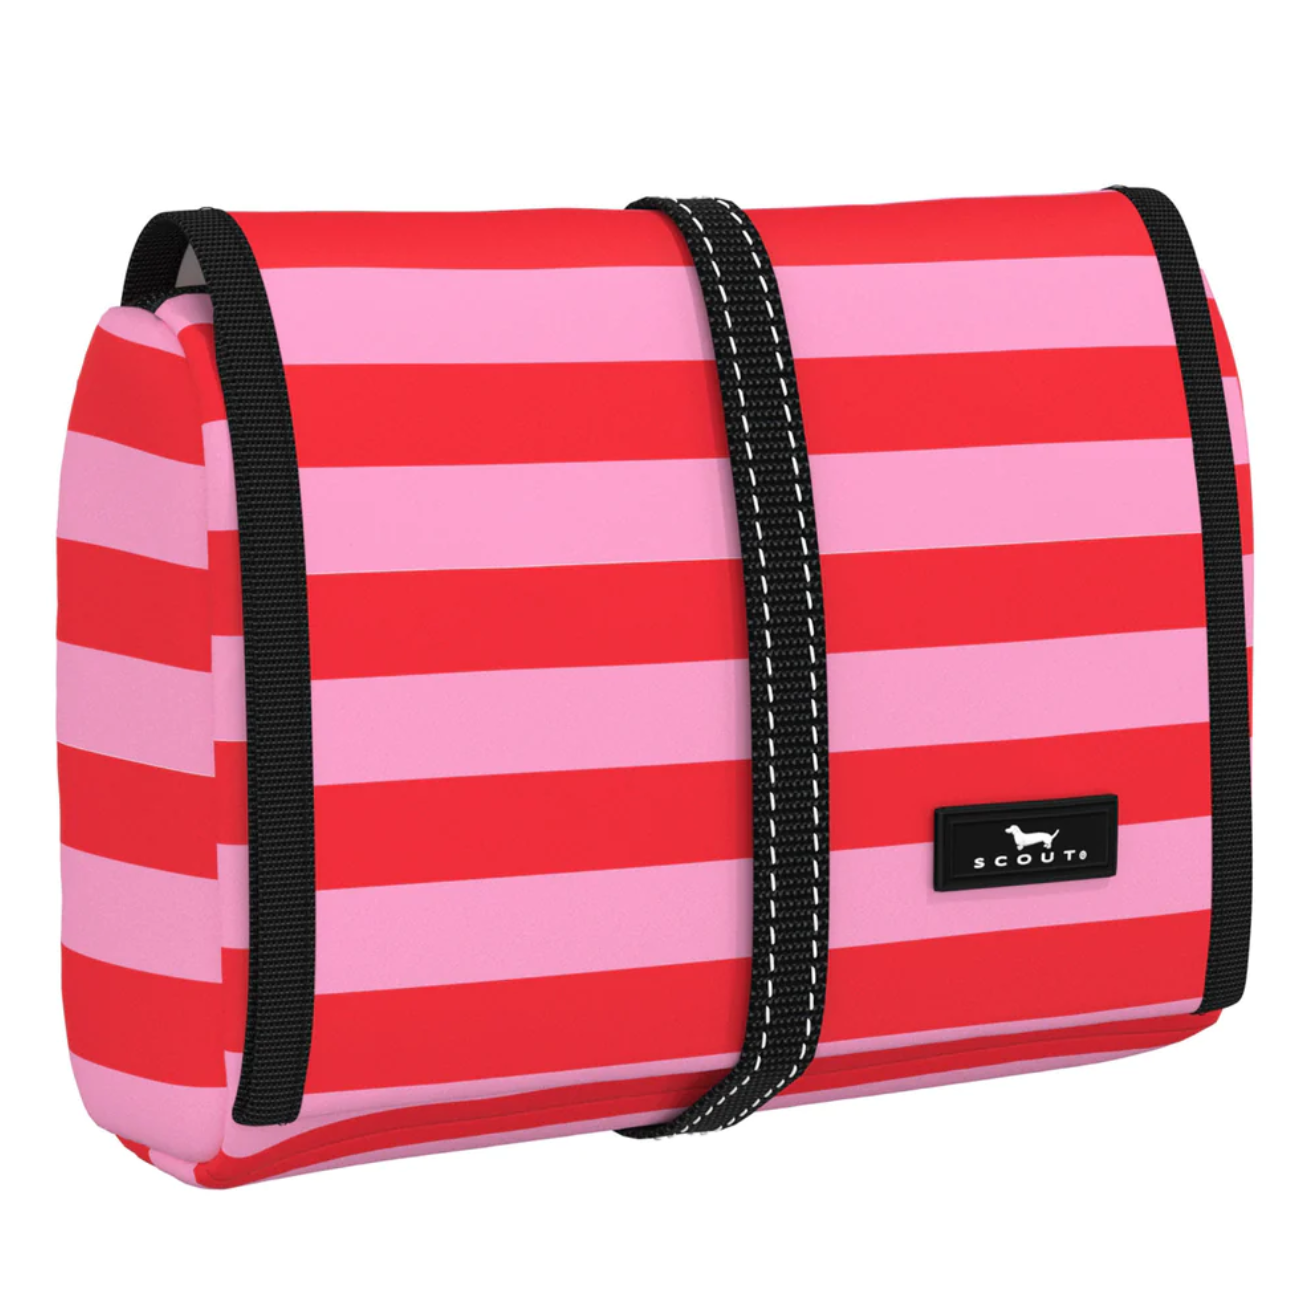 Scout Beauty Burrito Toiletry Bag Travel Accessories in Chili Ray Cyrus at Wrapsody